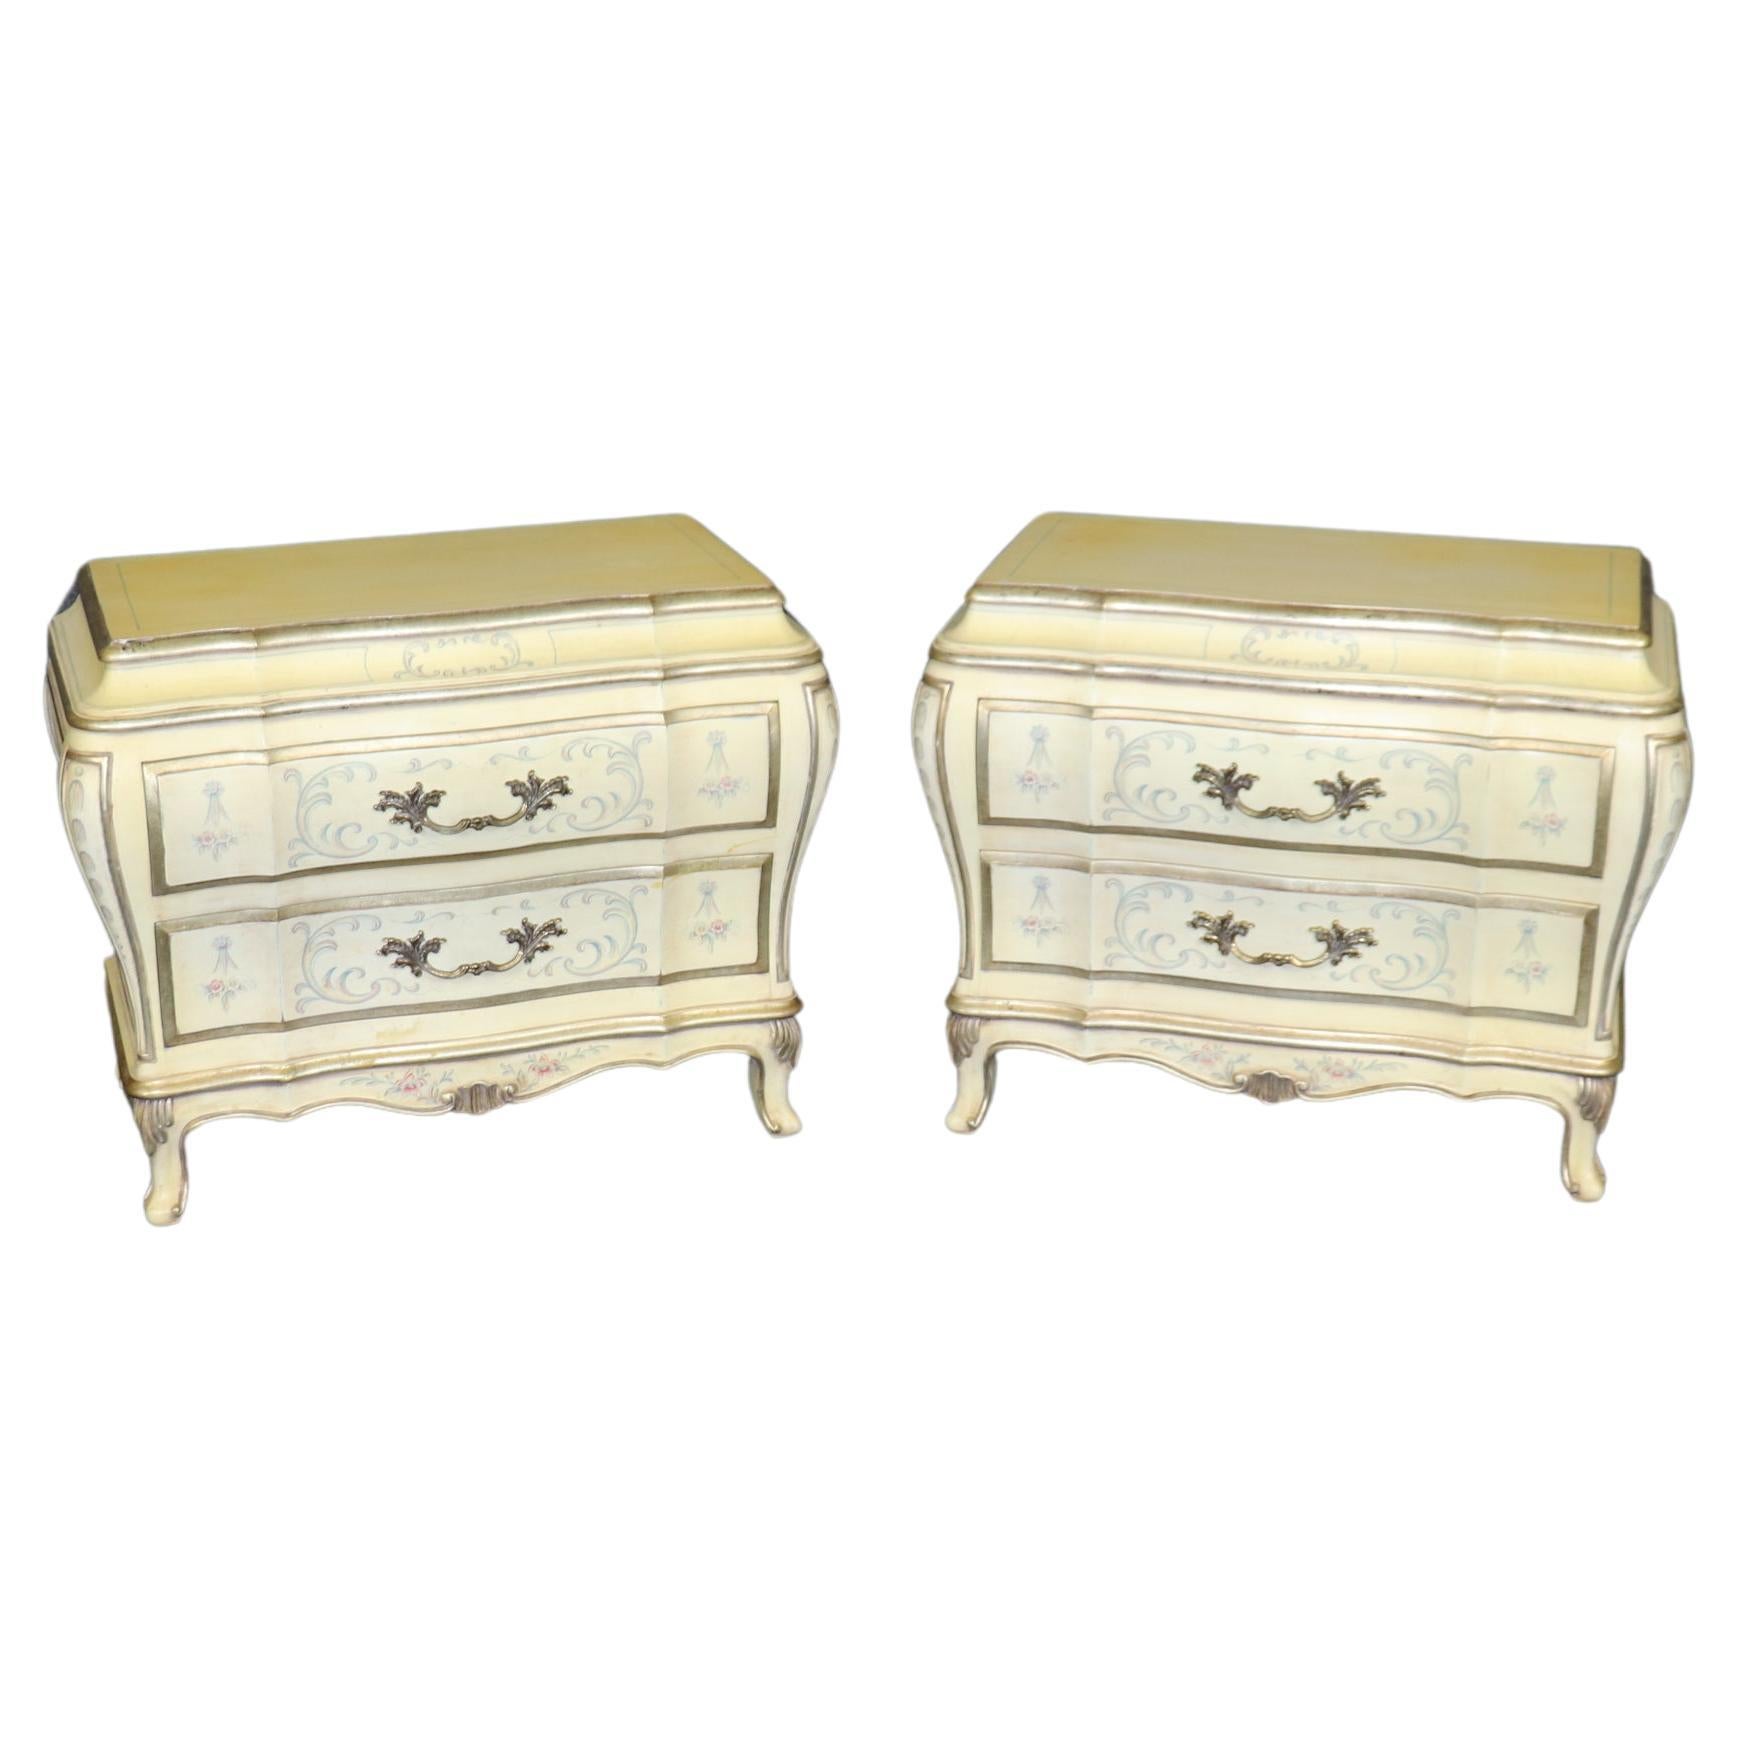 Pair of French Louis XV Style Paint Decorated Karges Nightstands Circa 1960s Era